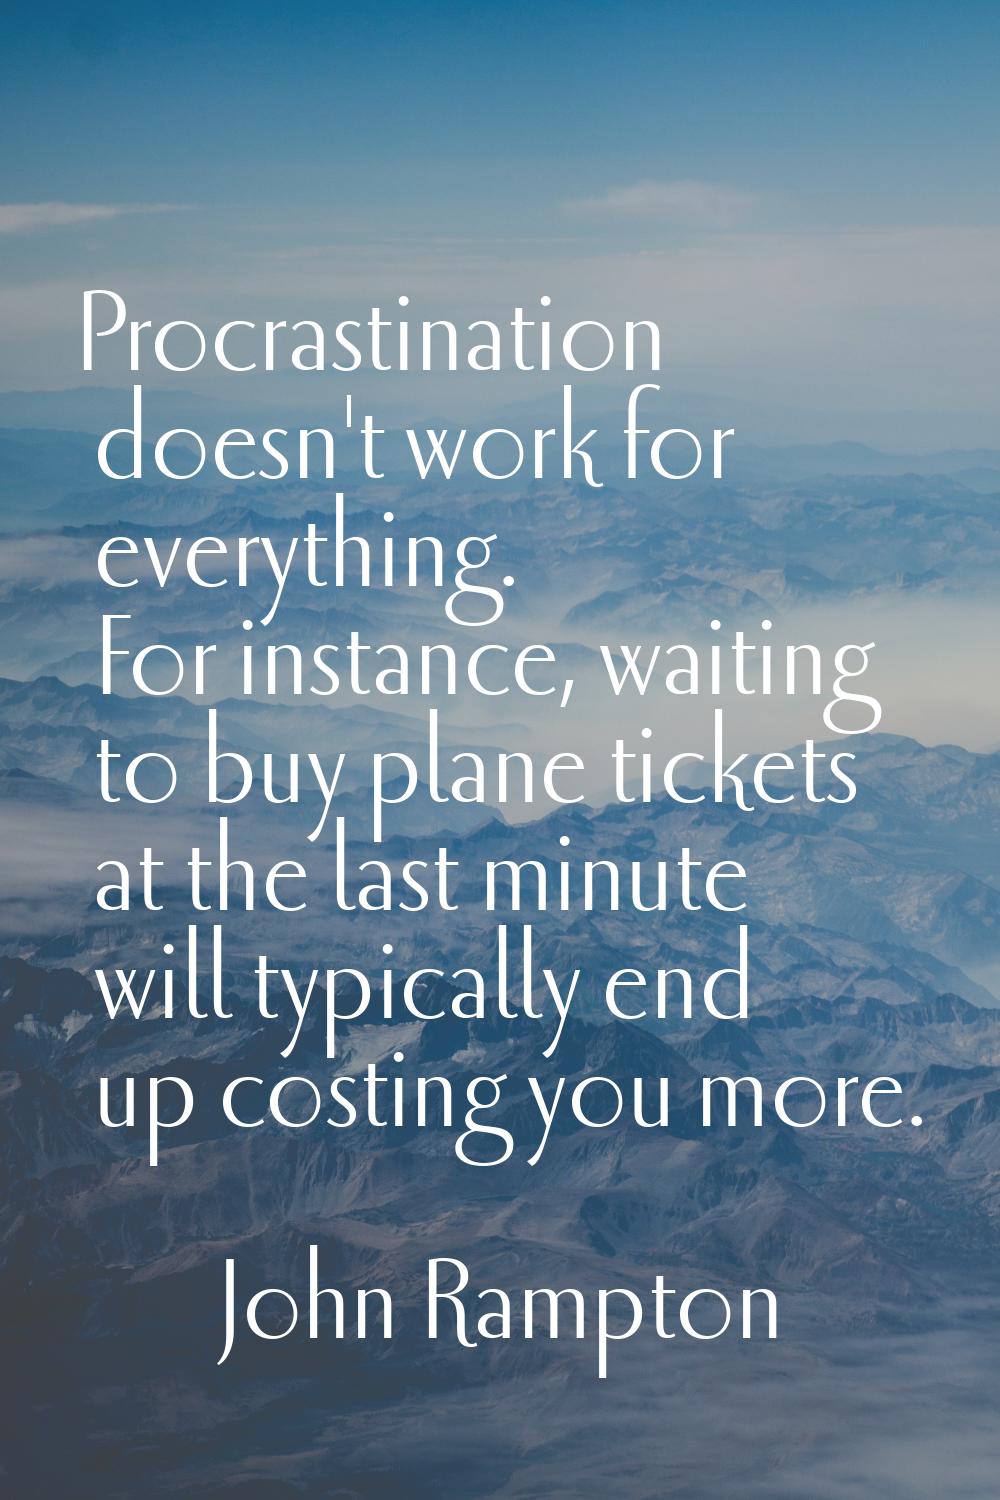 Procrastination doesn't work for everything. For instance, waiting to buy plane tickets at the last